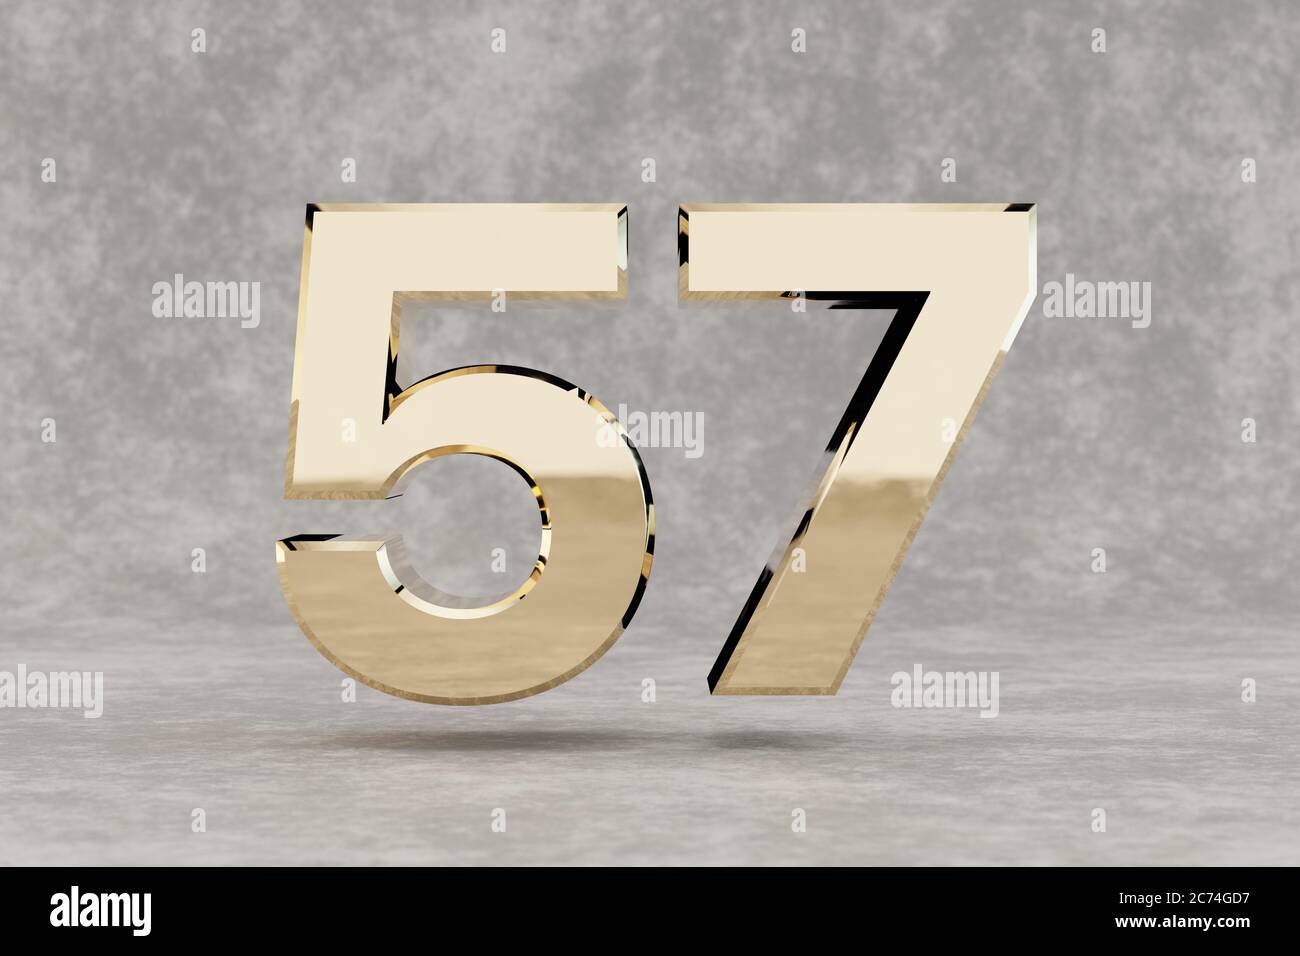 Gold 3d number 57. Glossy golden number on concrete background